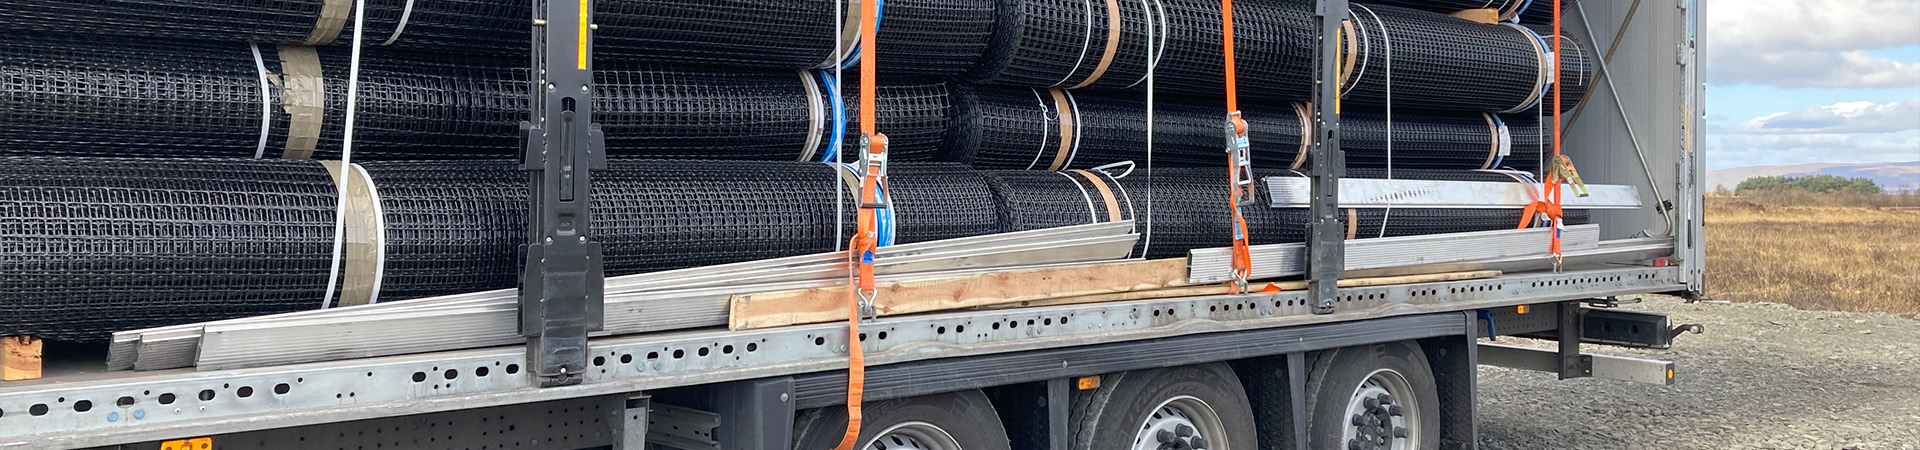 Lorry filled with geogrids